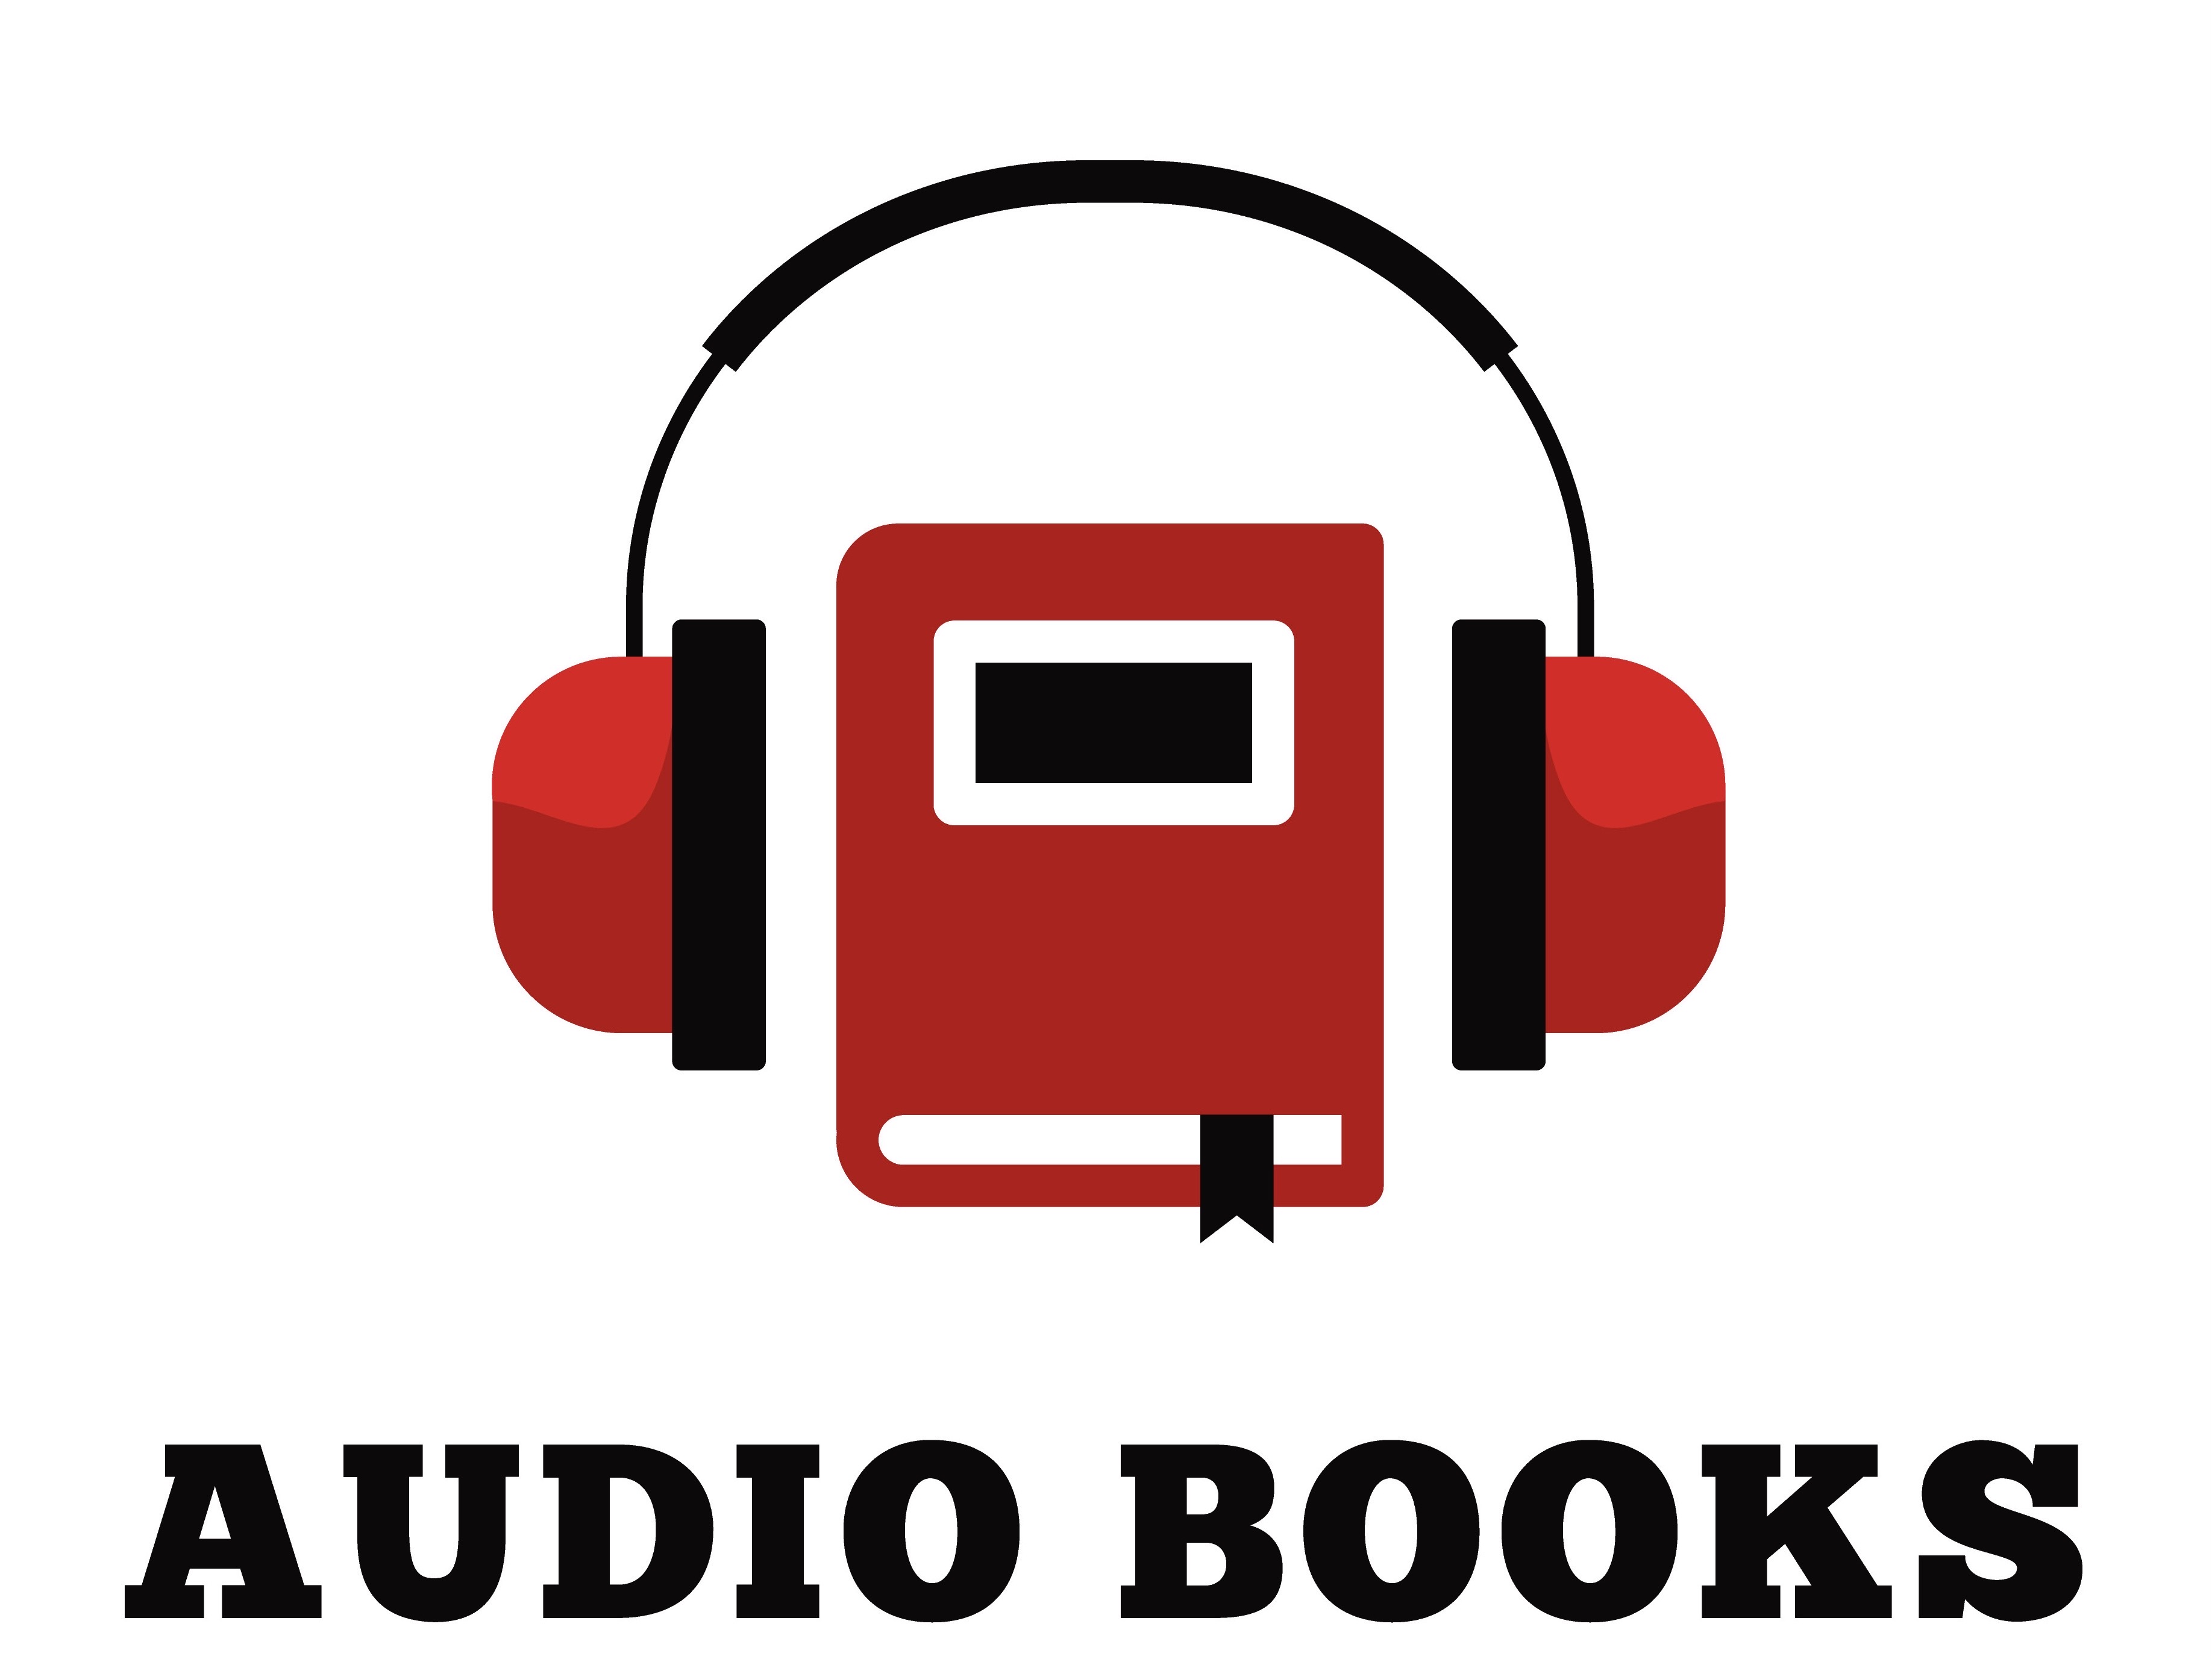 Graphic of a book with headphones around it and the word audiobooks underneath